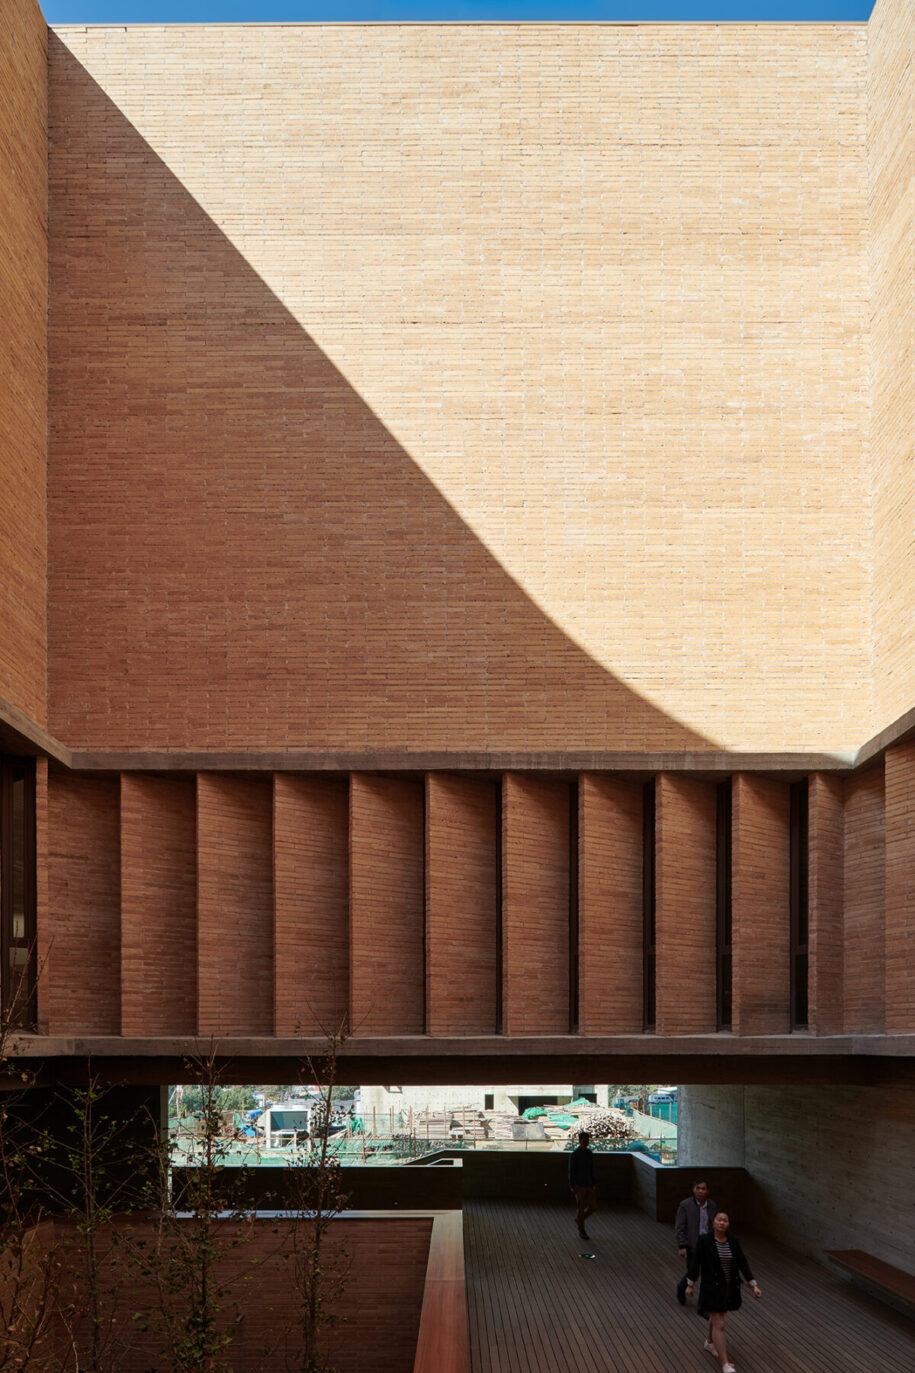 Archisearch Changjiang Art Museum in China | Vector Architects